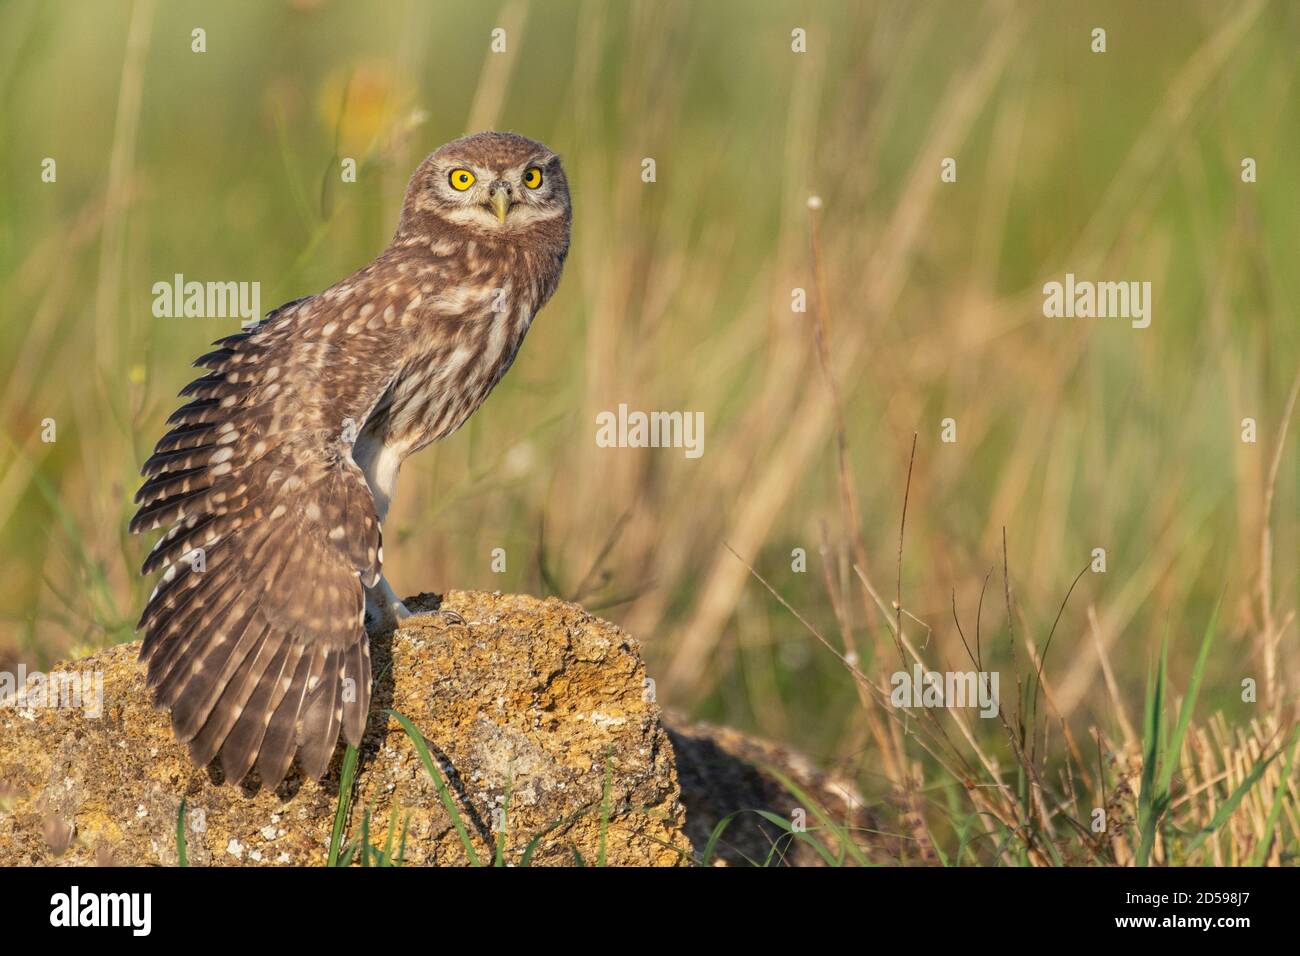 The Little Owl Athene noctua, a young owl sits on a rock with its wing open. Stock Photo